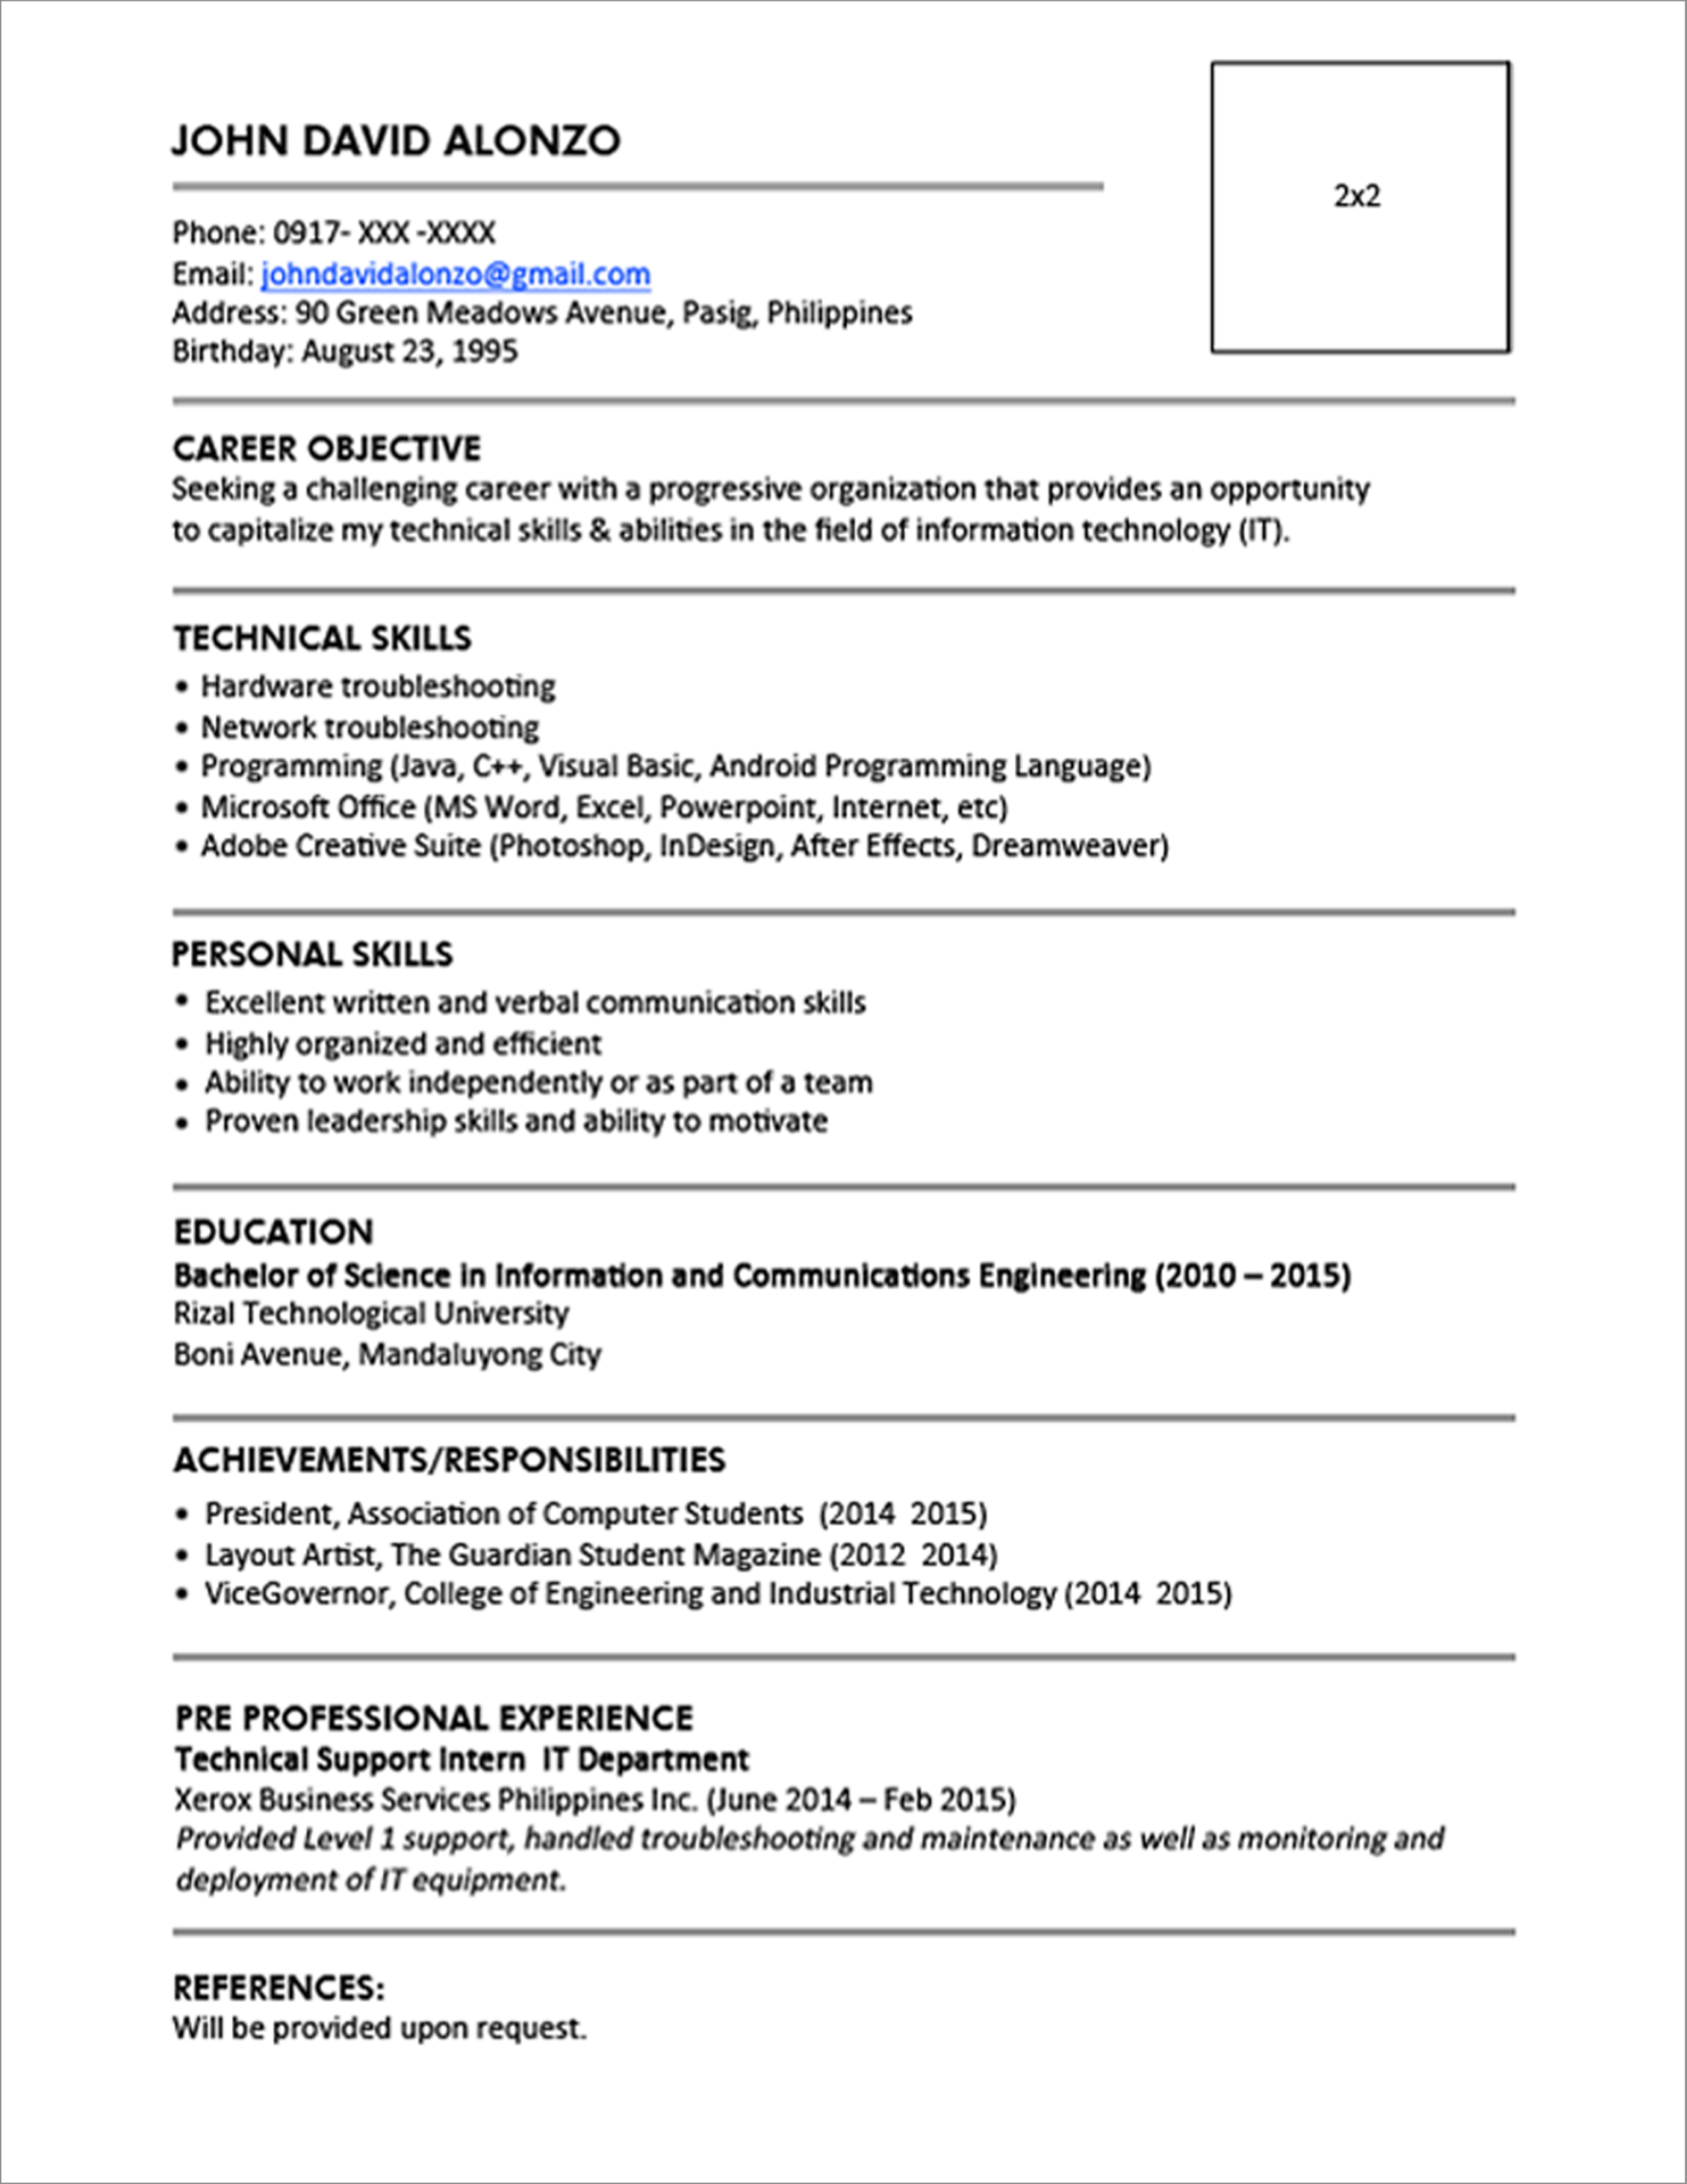 Resume Templates You Can Download | Jobstreet Philippines With Free Basic Resume Templates Microsoft Word